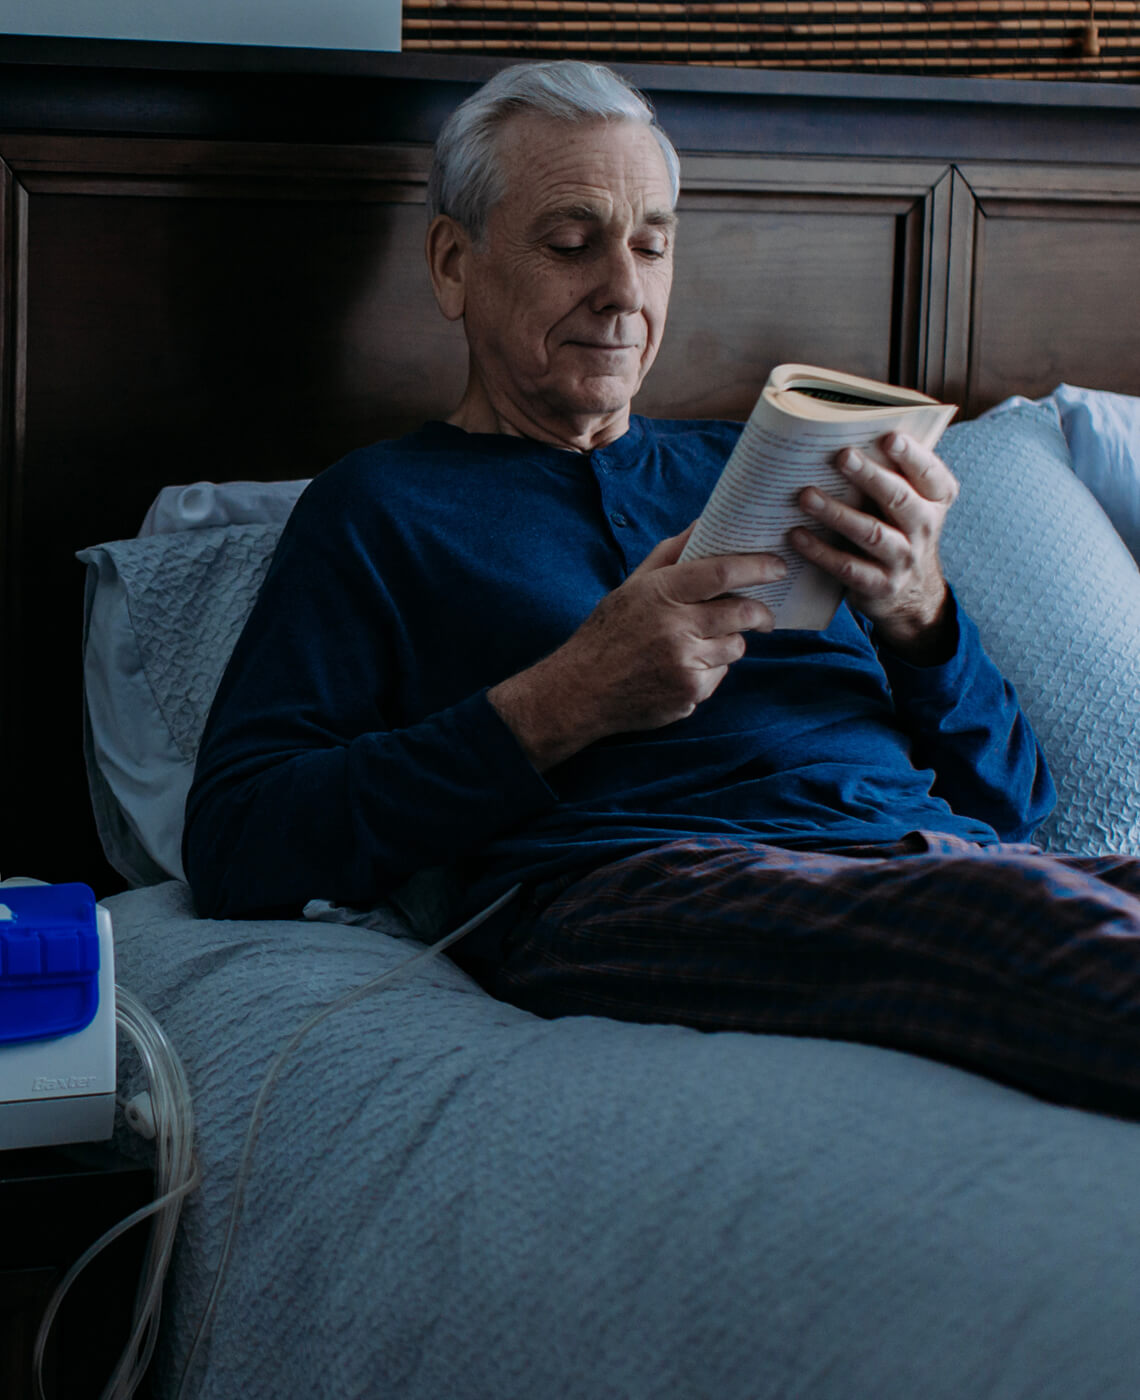 Man reading a book in bed with a catheter